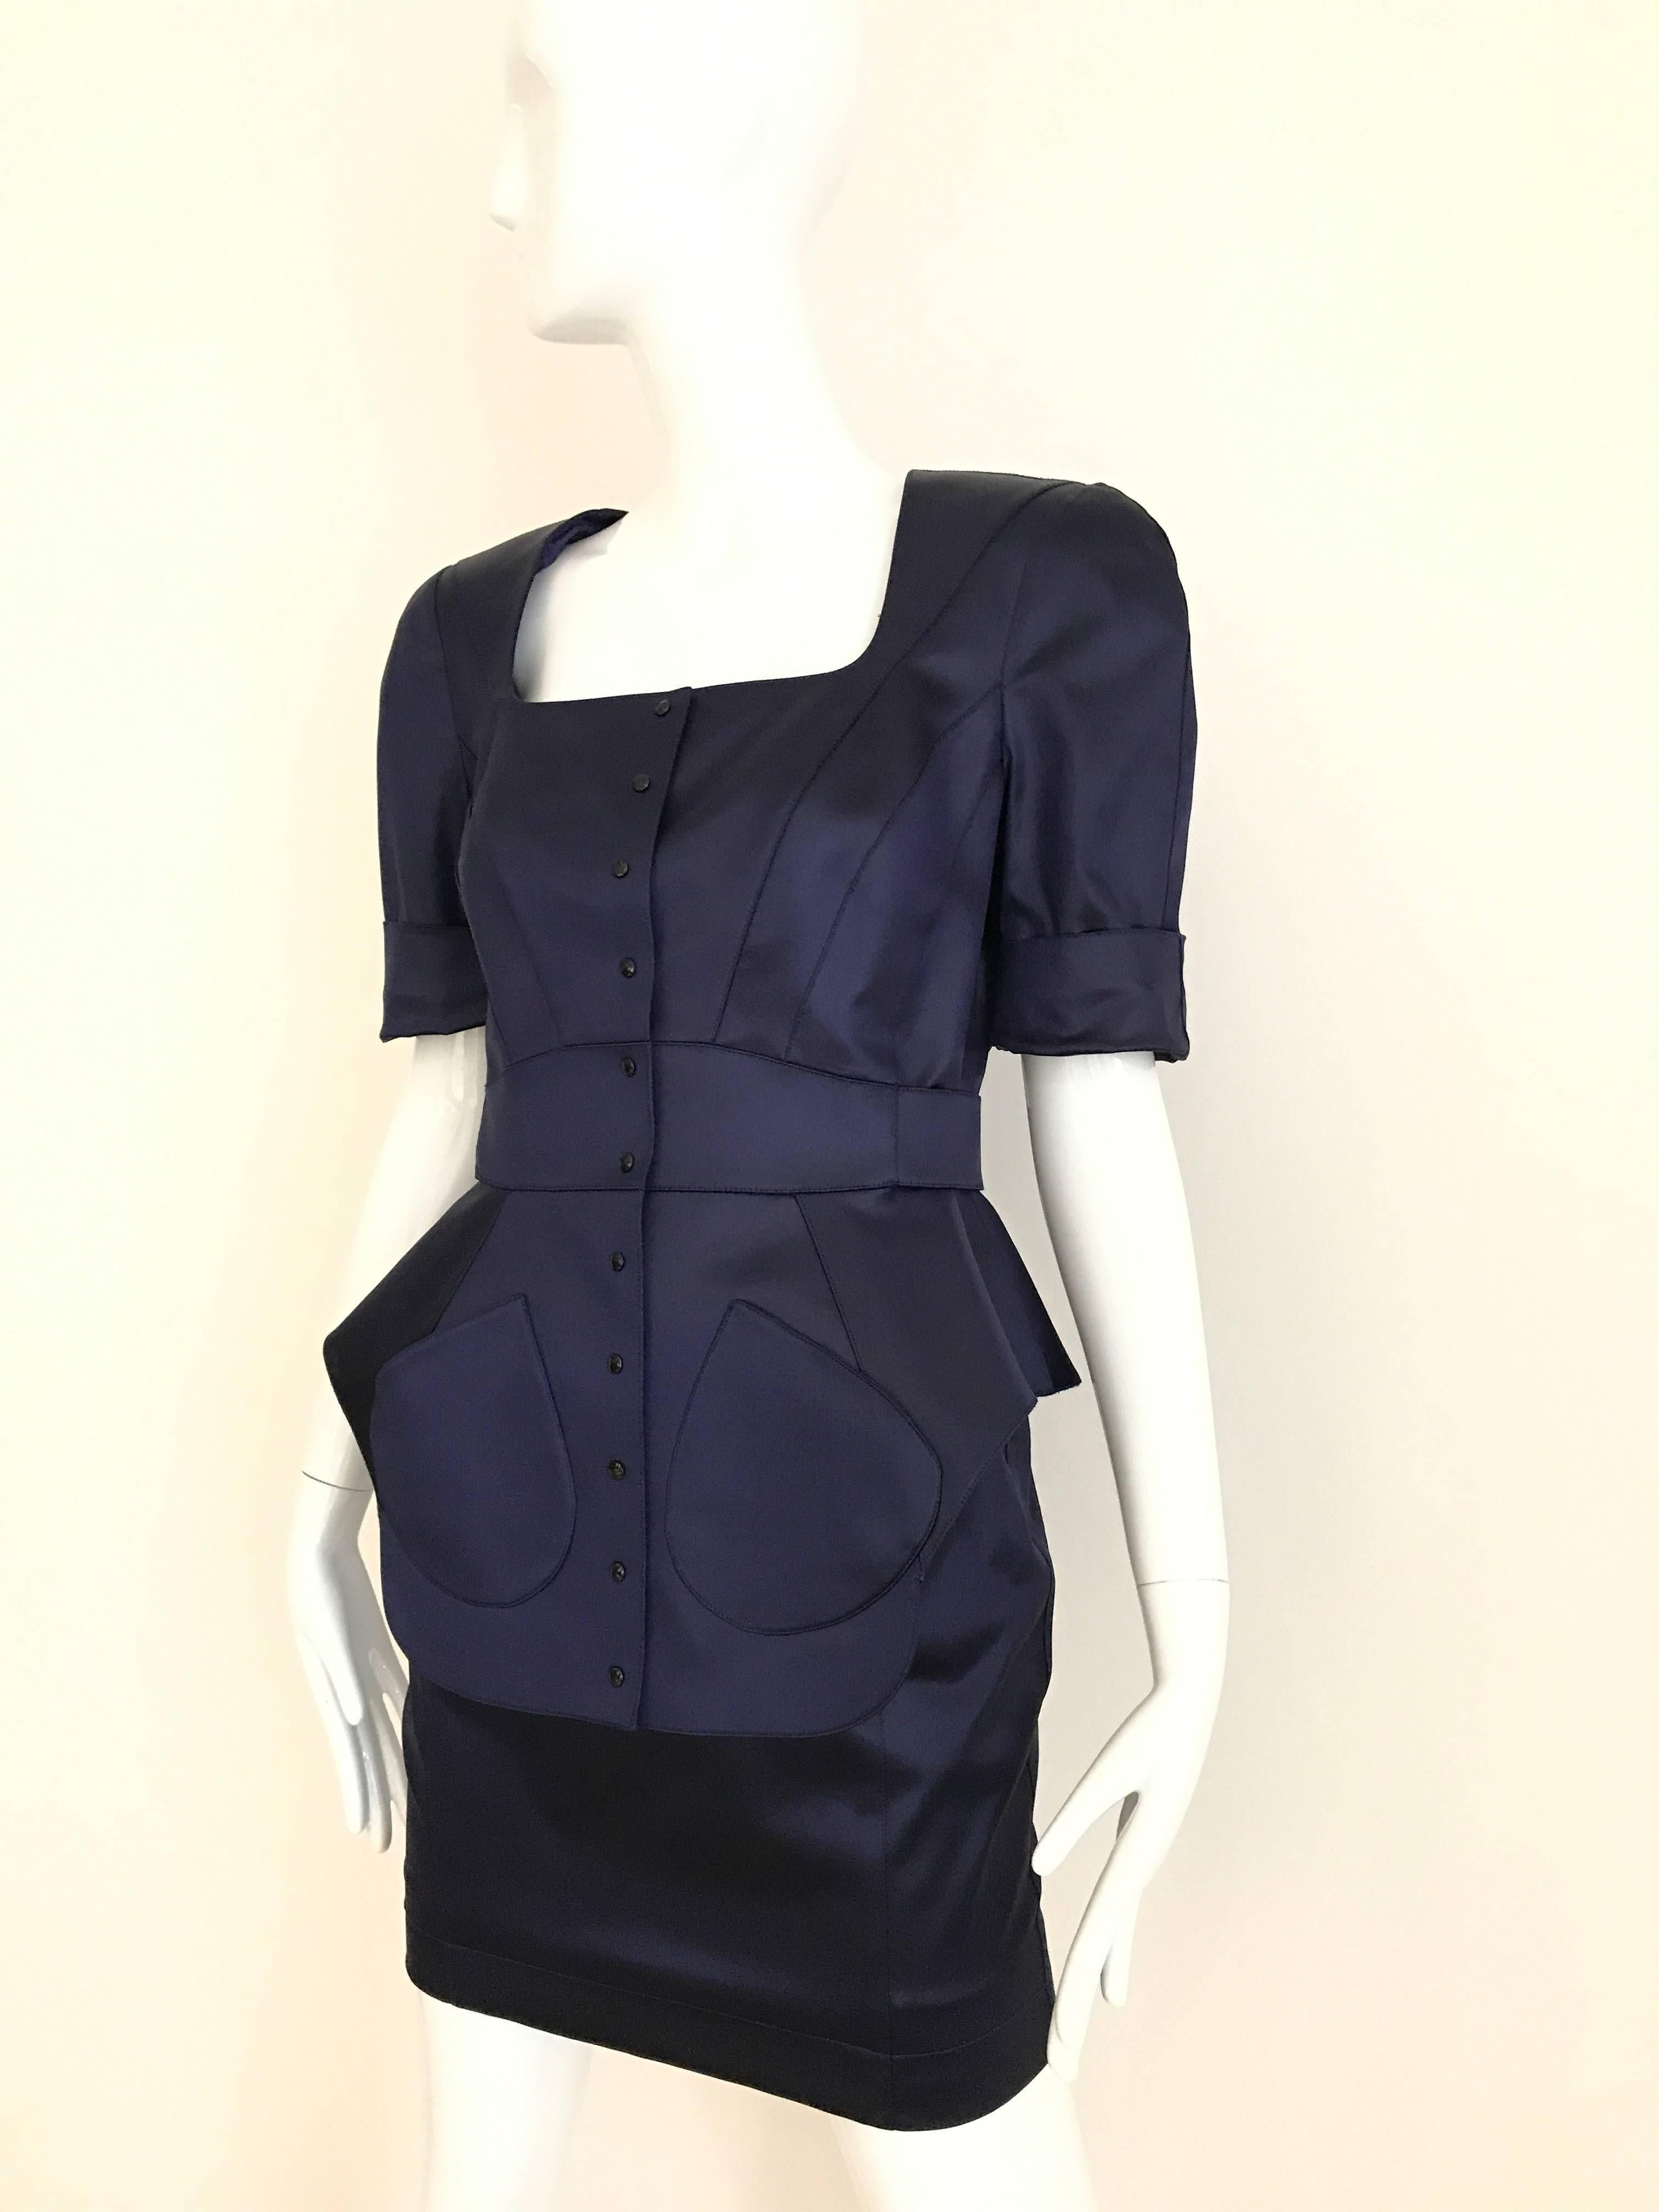 1980s Vintage THIERRY MUGLER Blue Satin Fitted peplum Jacket and Skirt ensemble .
Fitted Jacket with soft shoulder pad and square neck. Snap buttons and bow at the back. Form fitting pencil skirt. 
Fit Medium 4/6
Jacket measurement: Bust: 36 inch/